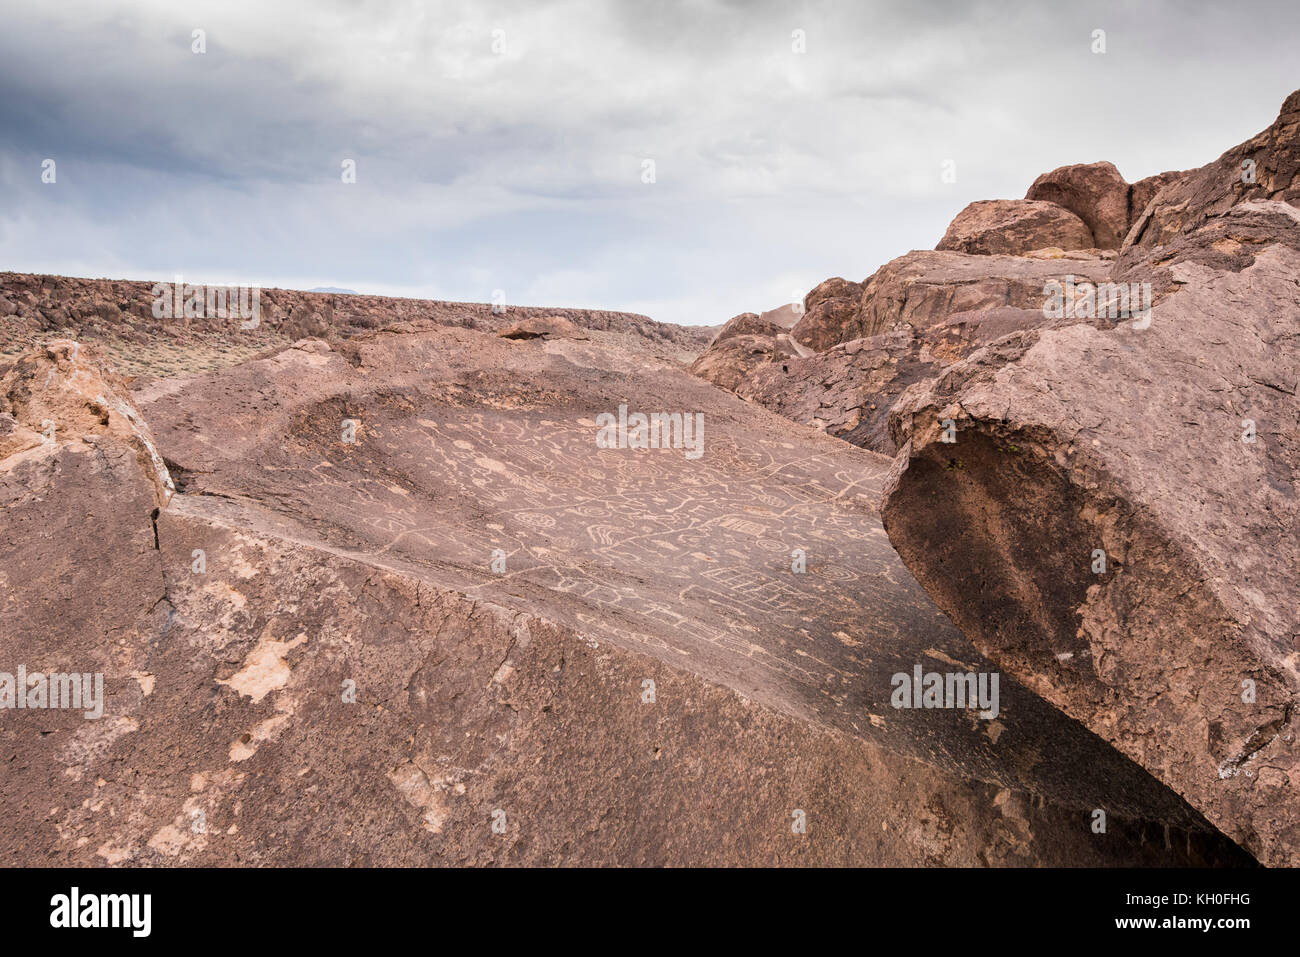 Sky Rock, a skyward facing series of petroglyphs left by the Paiute-Shoshone Indians thousands of years ago, sits before the Sierra Nevada mountains. Stock Photo